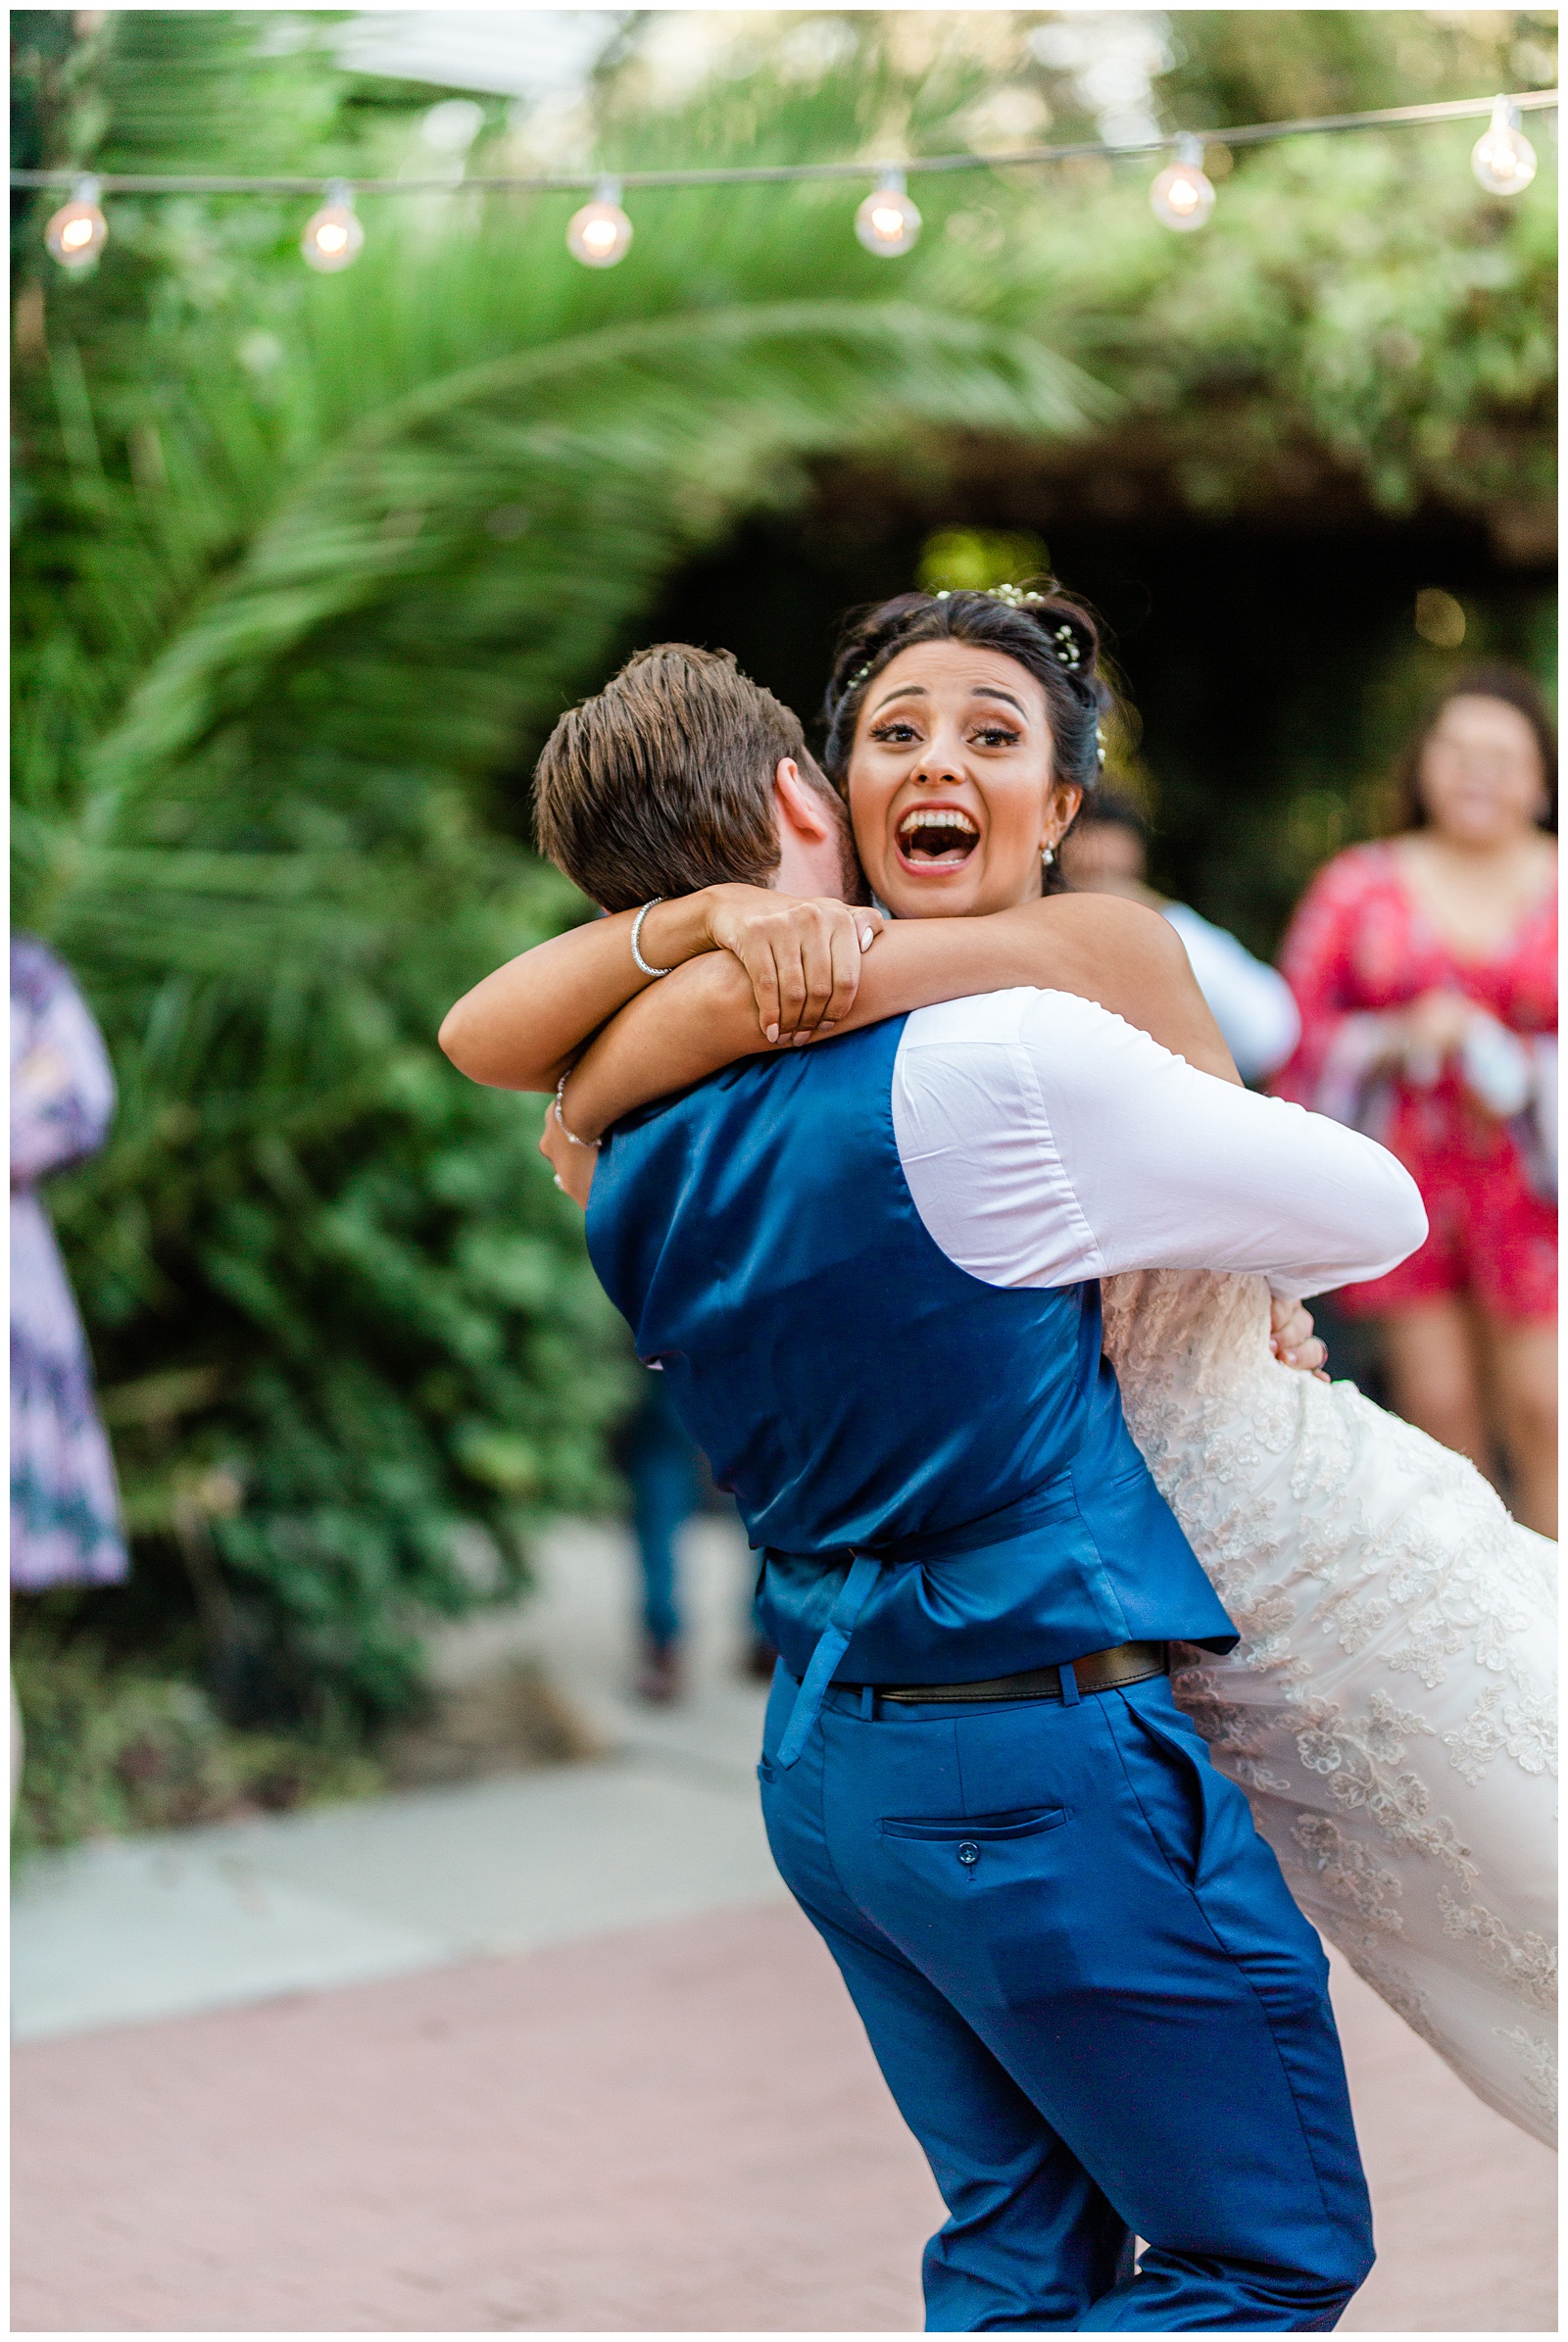 groom spinning the bride around during their first dance